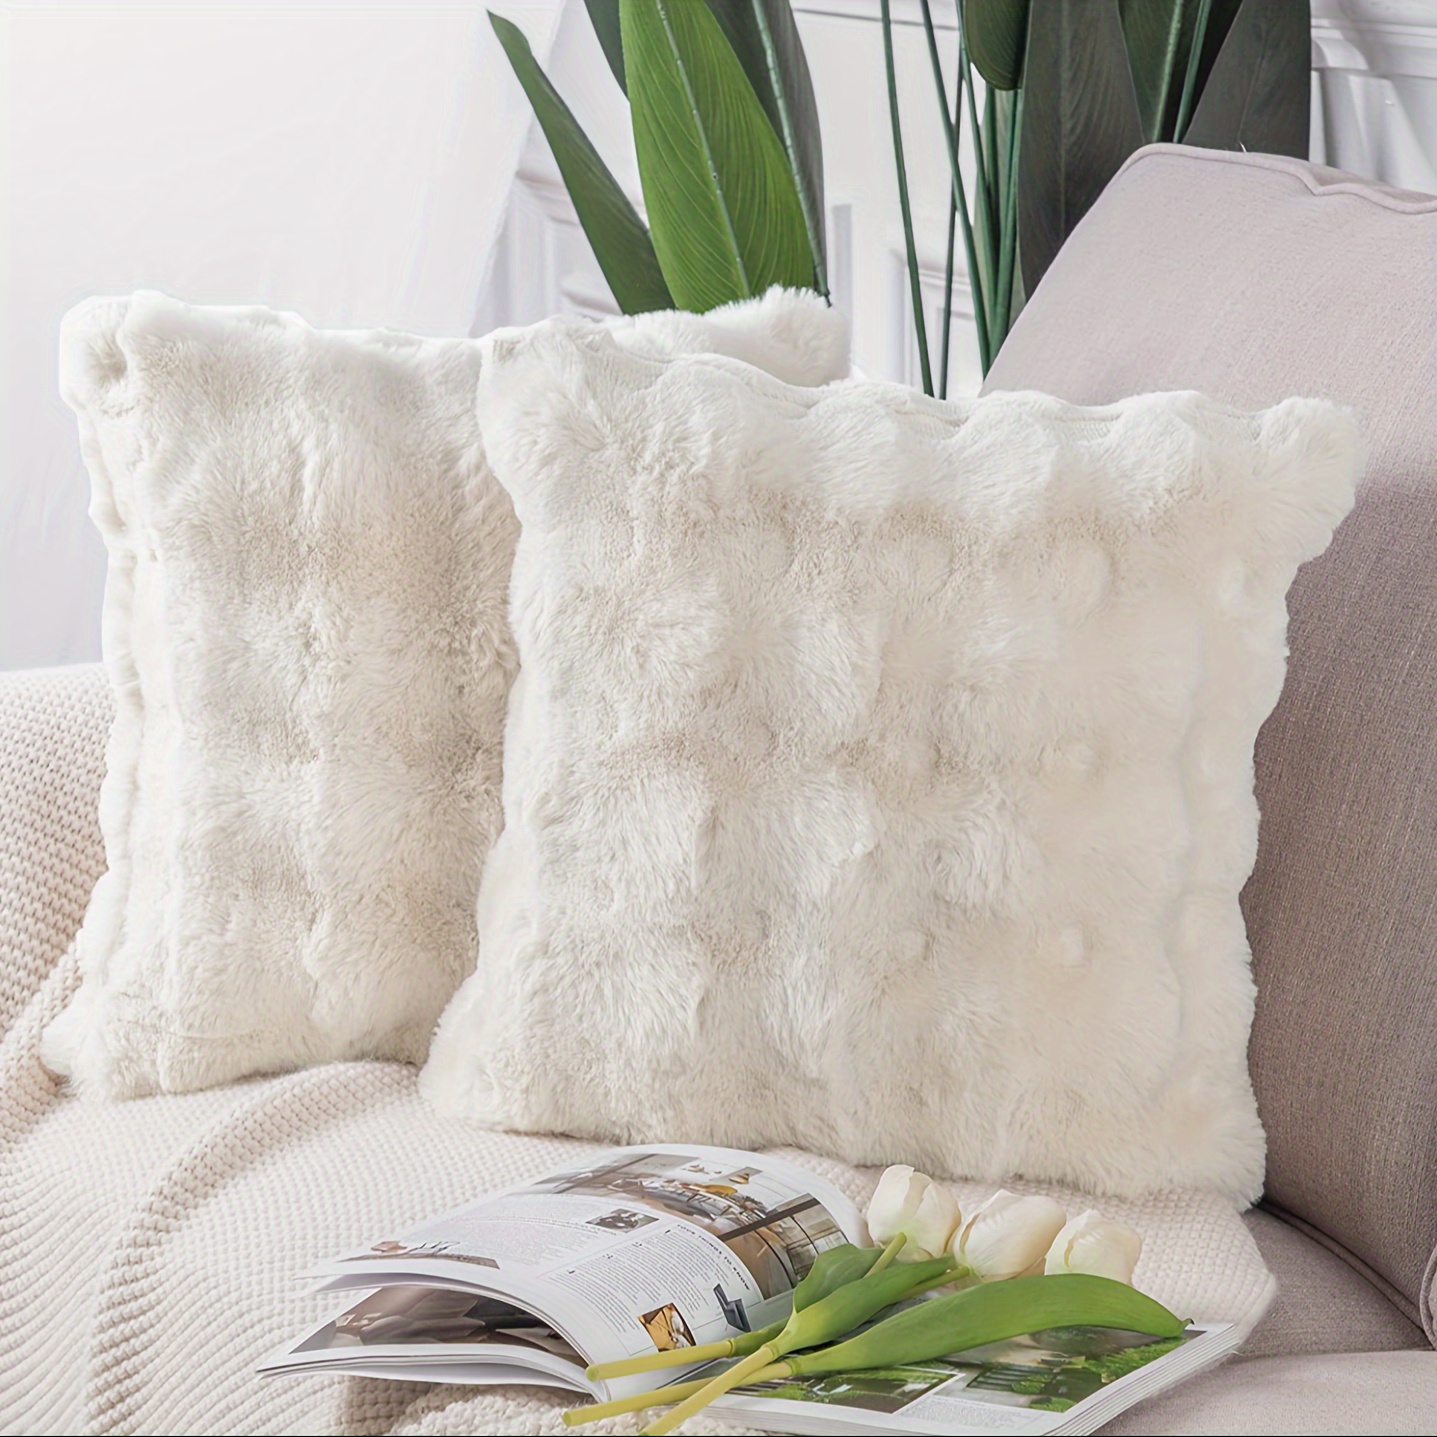 

Boho-chic Ultra-soft Faux Rabbit Fur Pillow Cover, Single-sided Plush Cushion Case For Sofa & Car Decor, Zip Closure, Geometric Pattern - Hand Wash Only (pillow Insert Not Included)